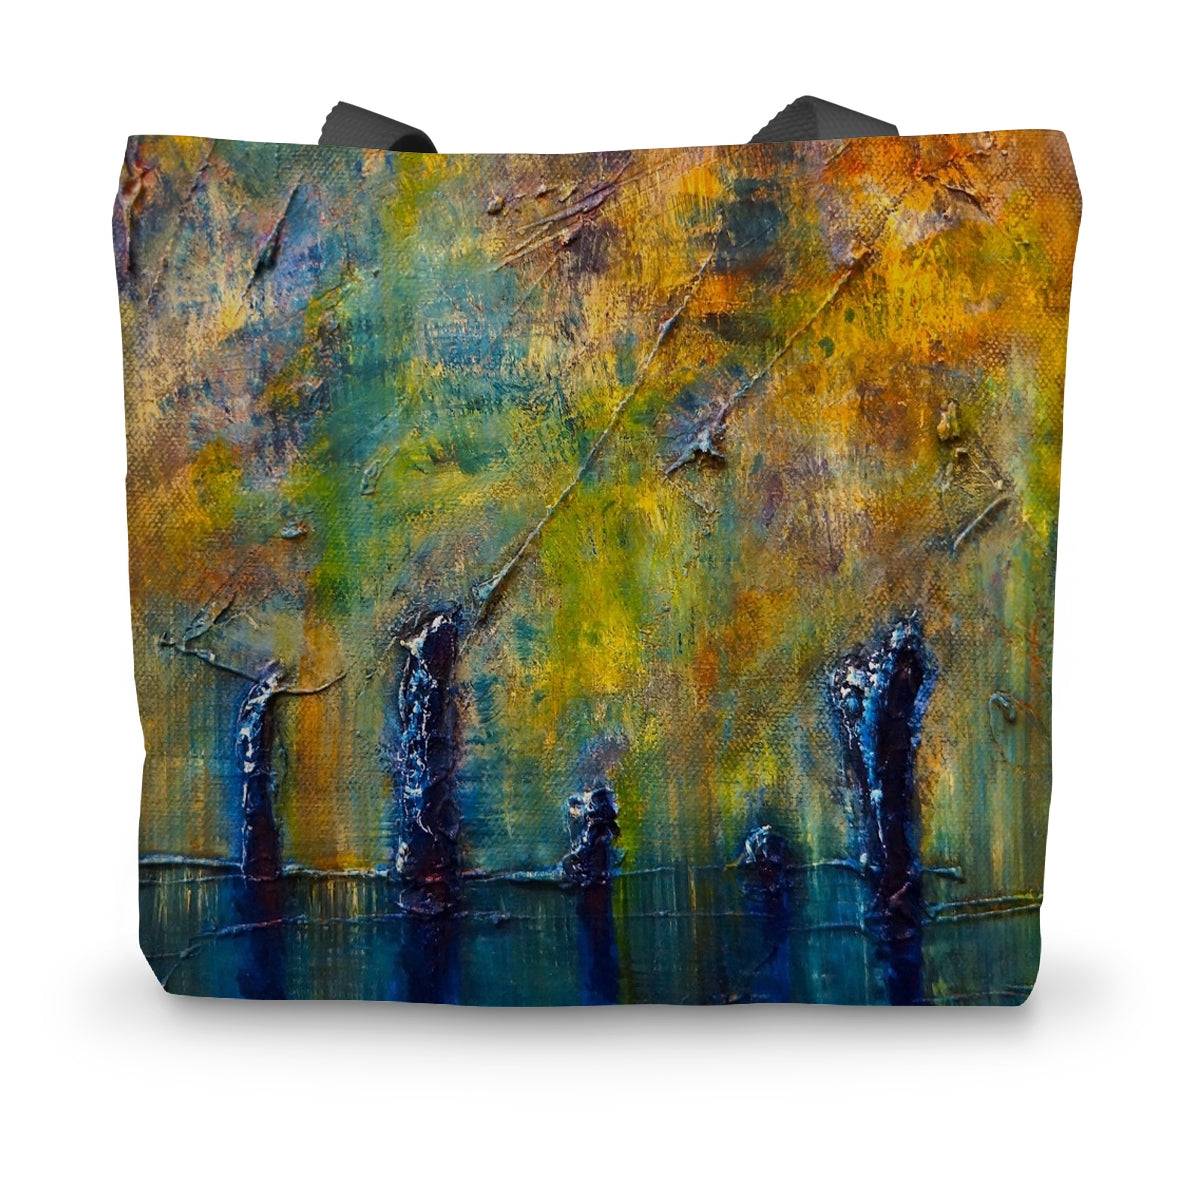 Stenness Moonlight Orkney Art Gifts Canvas Tote Bag-Bags-Orkney Art Gallery-14"x18.5"-Paintings, Prints, Homeware, Art Gifts From Scotland By Scottish Artist Kevin Hunter